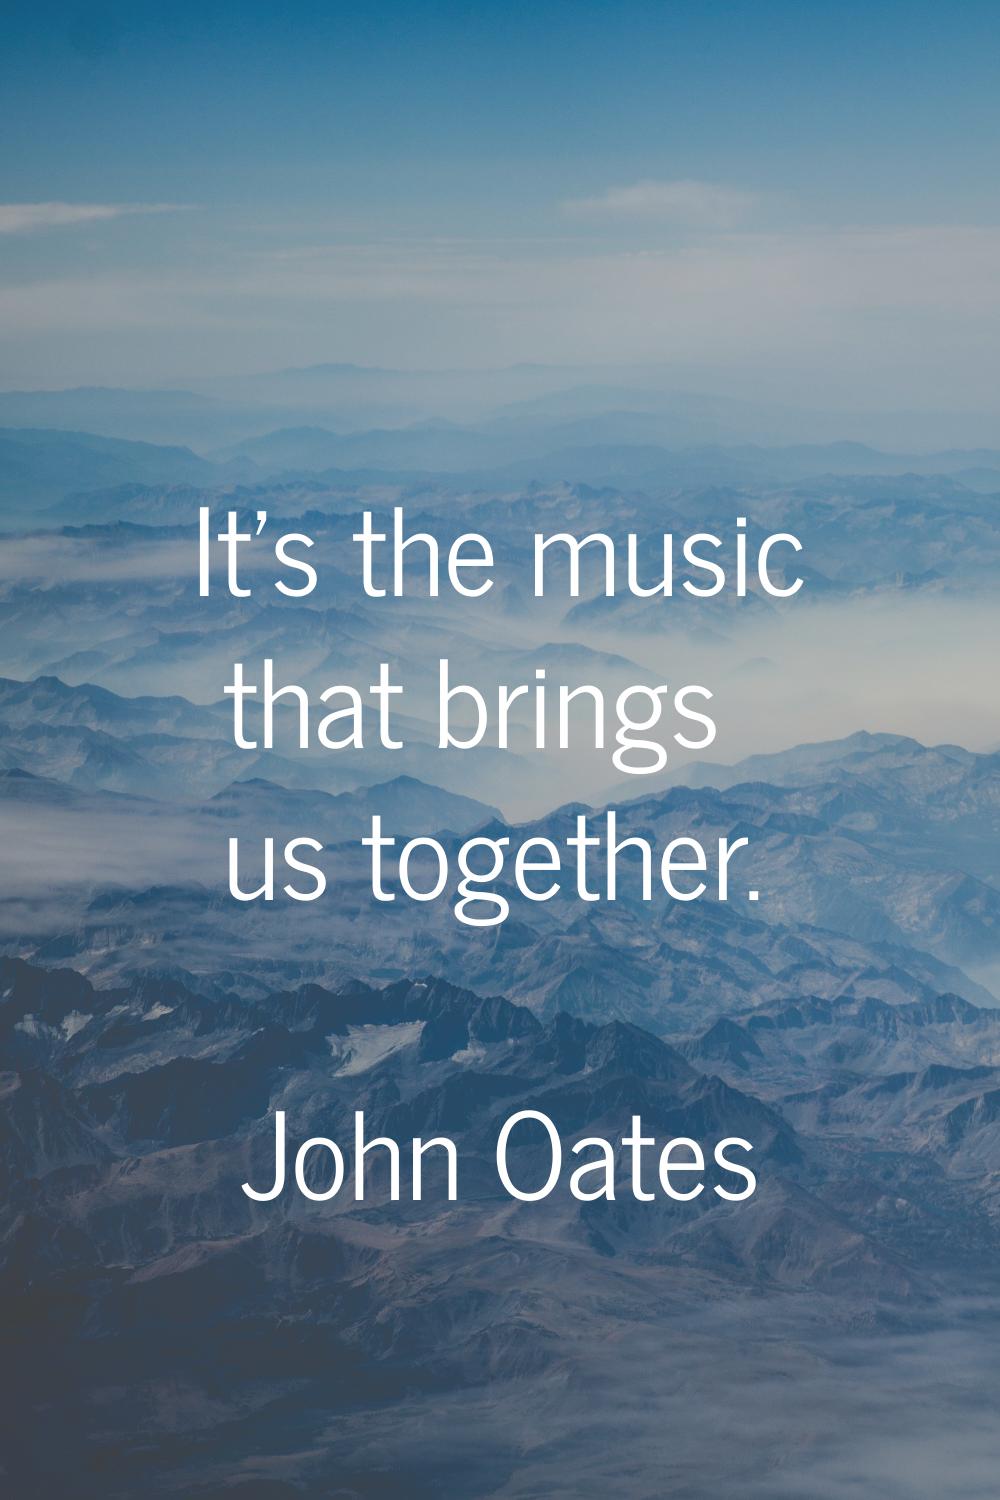 It's the music that brings us together.